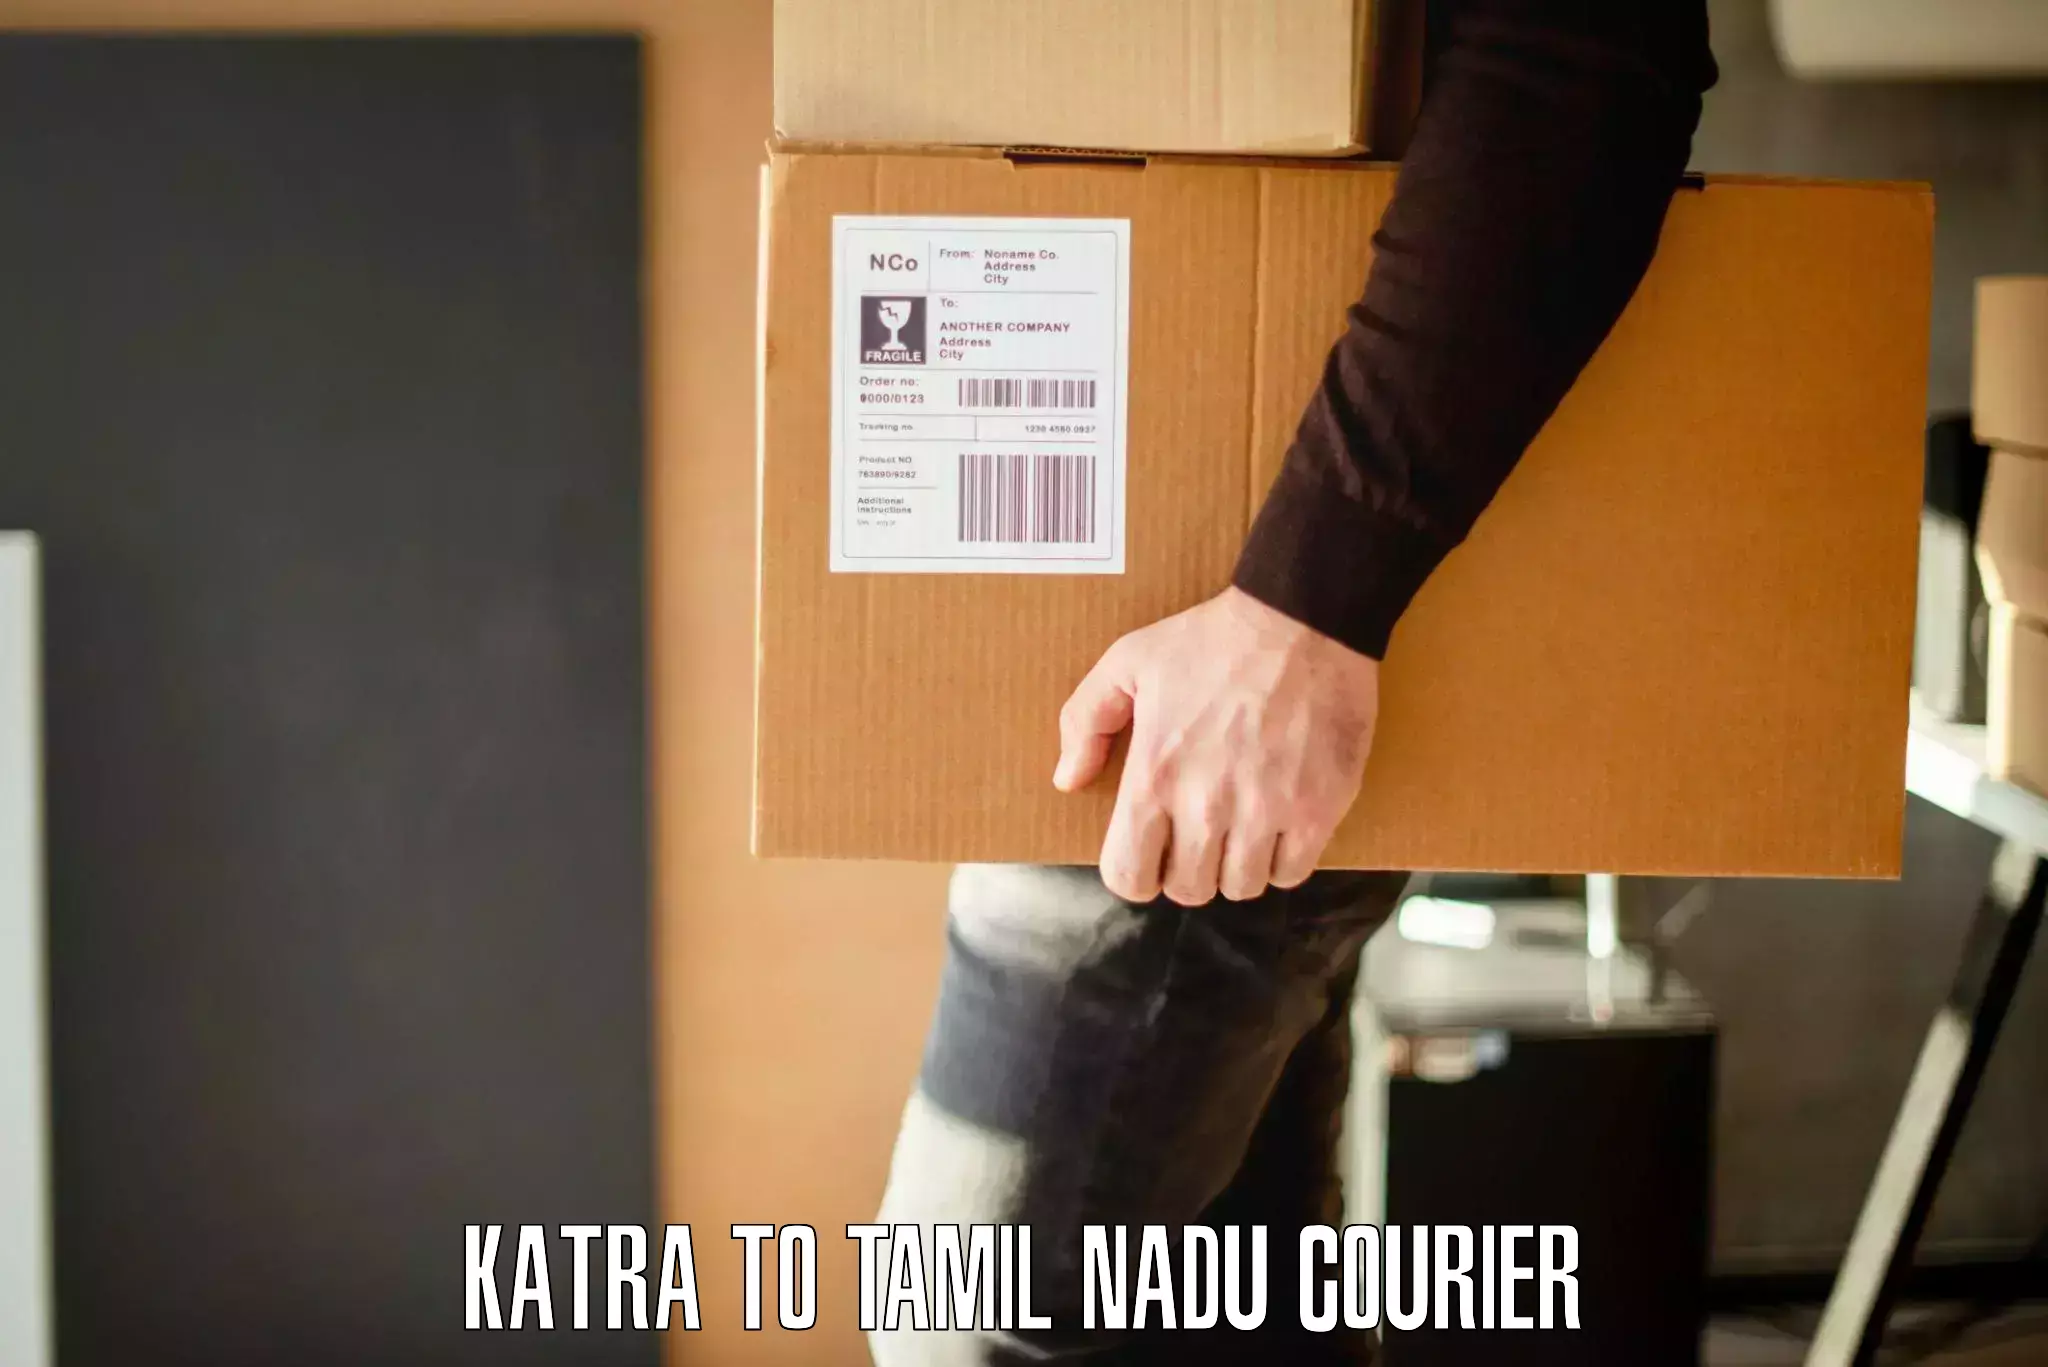 Personalized moving and storage Katra to Tamil Nadu